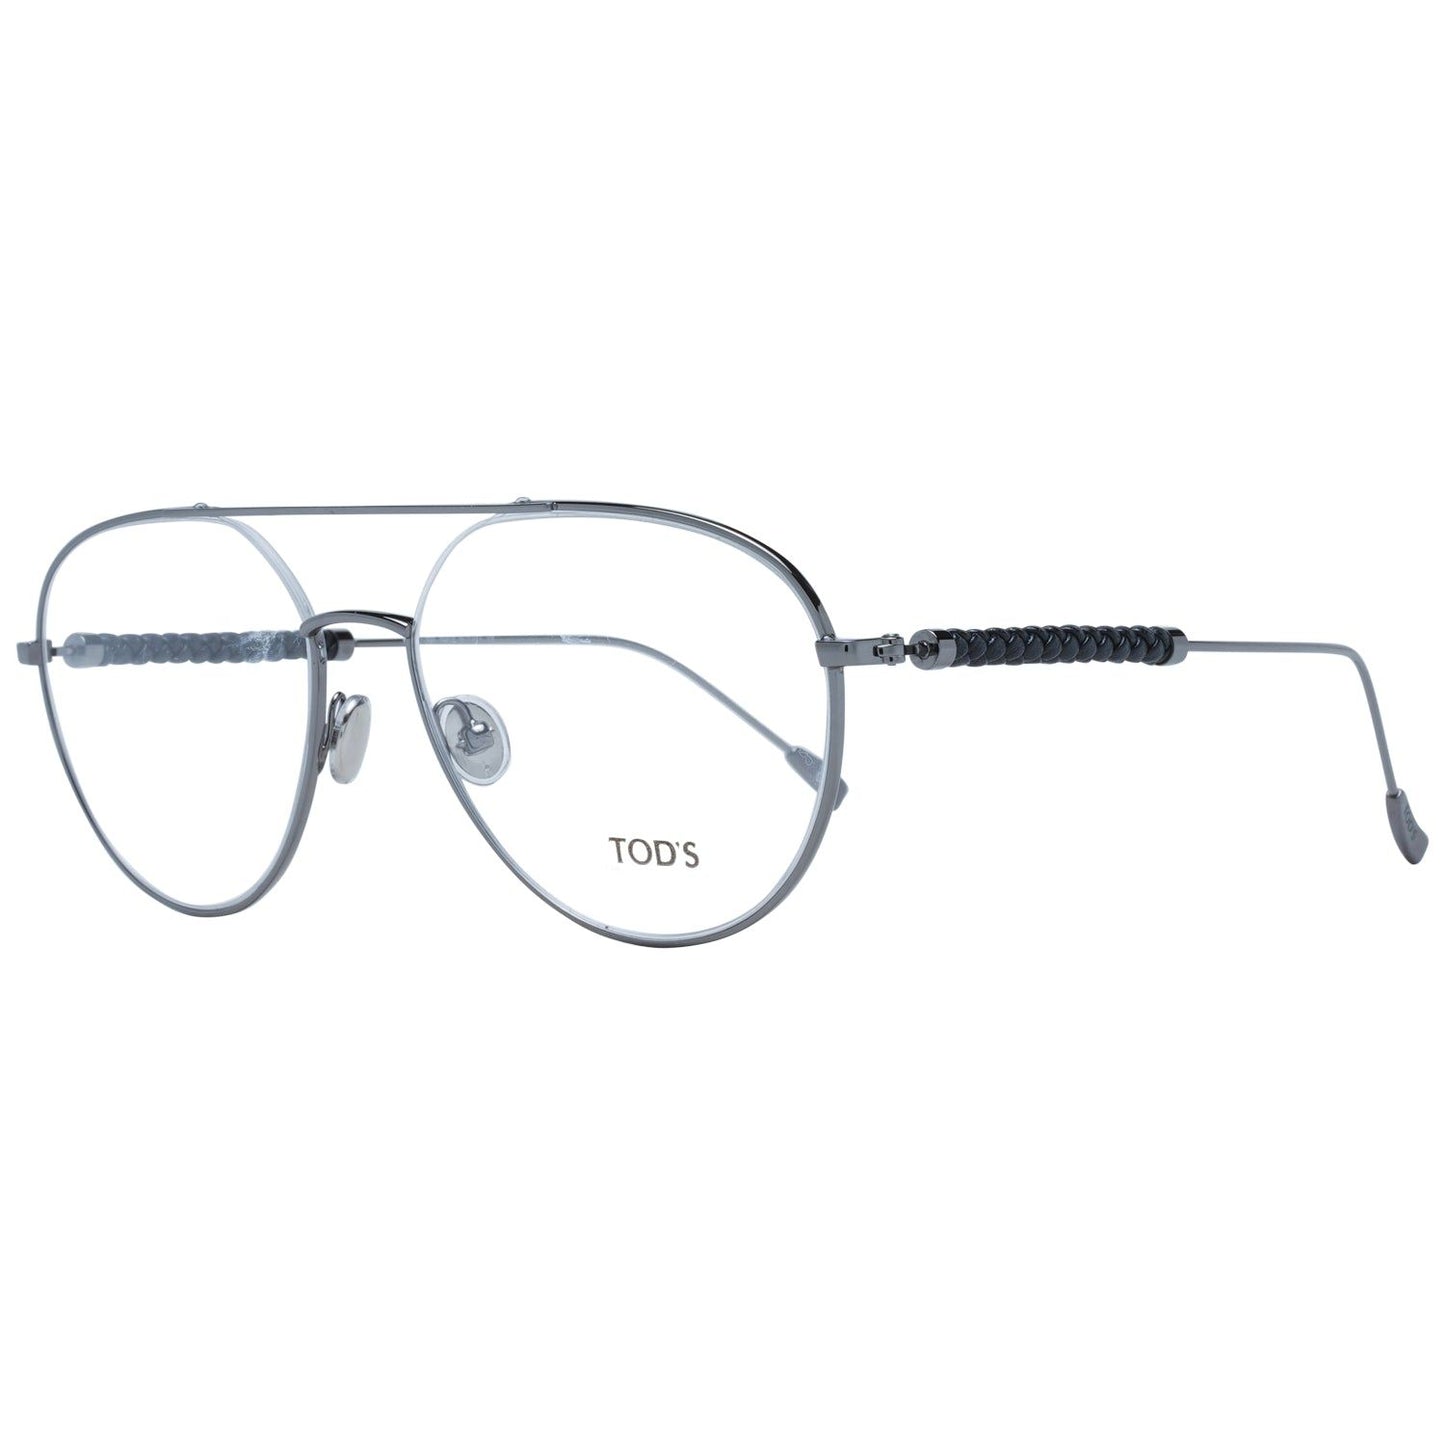 TODS FRAME TODS MOD. TO5277 56008 SUNGLASSES & EYEWEAR tods-mod-to5277-56008